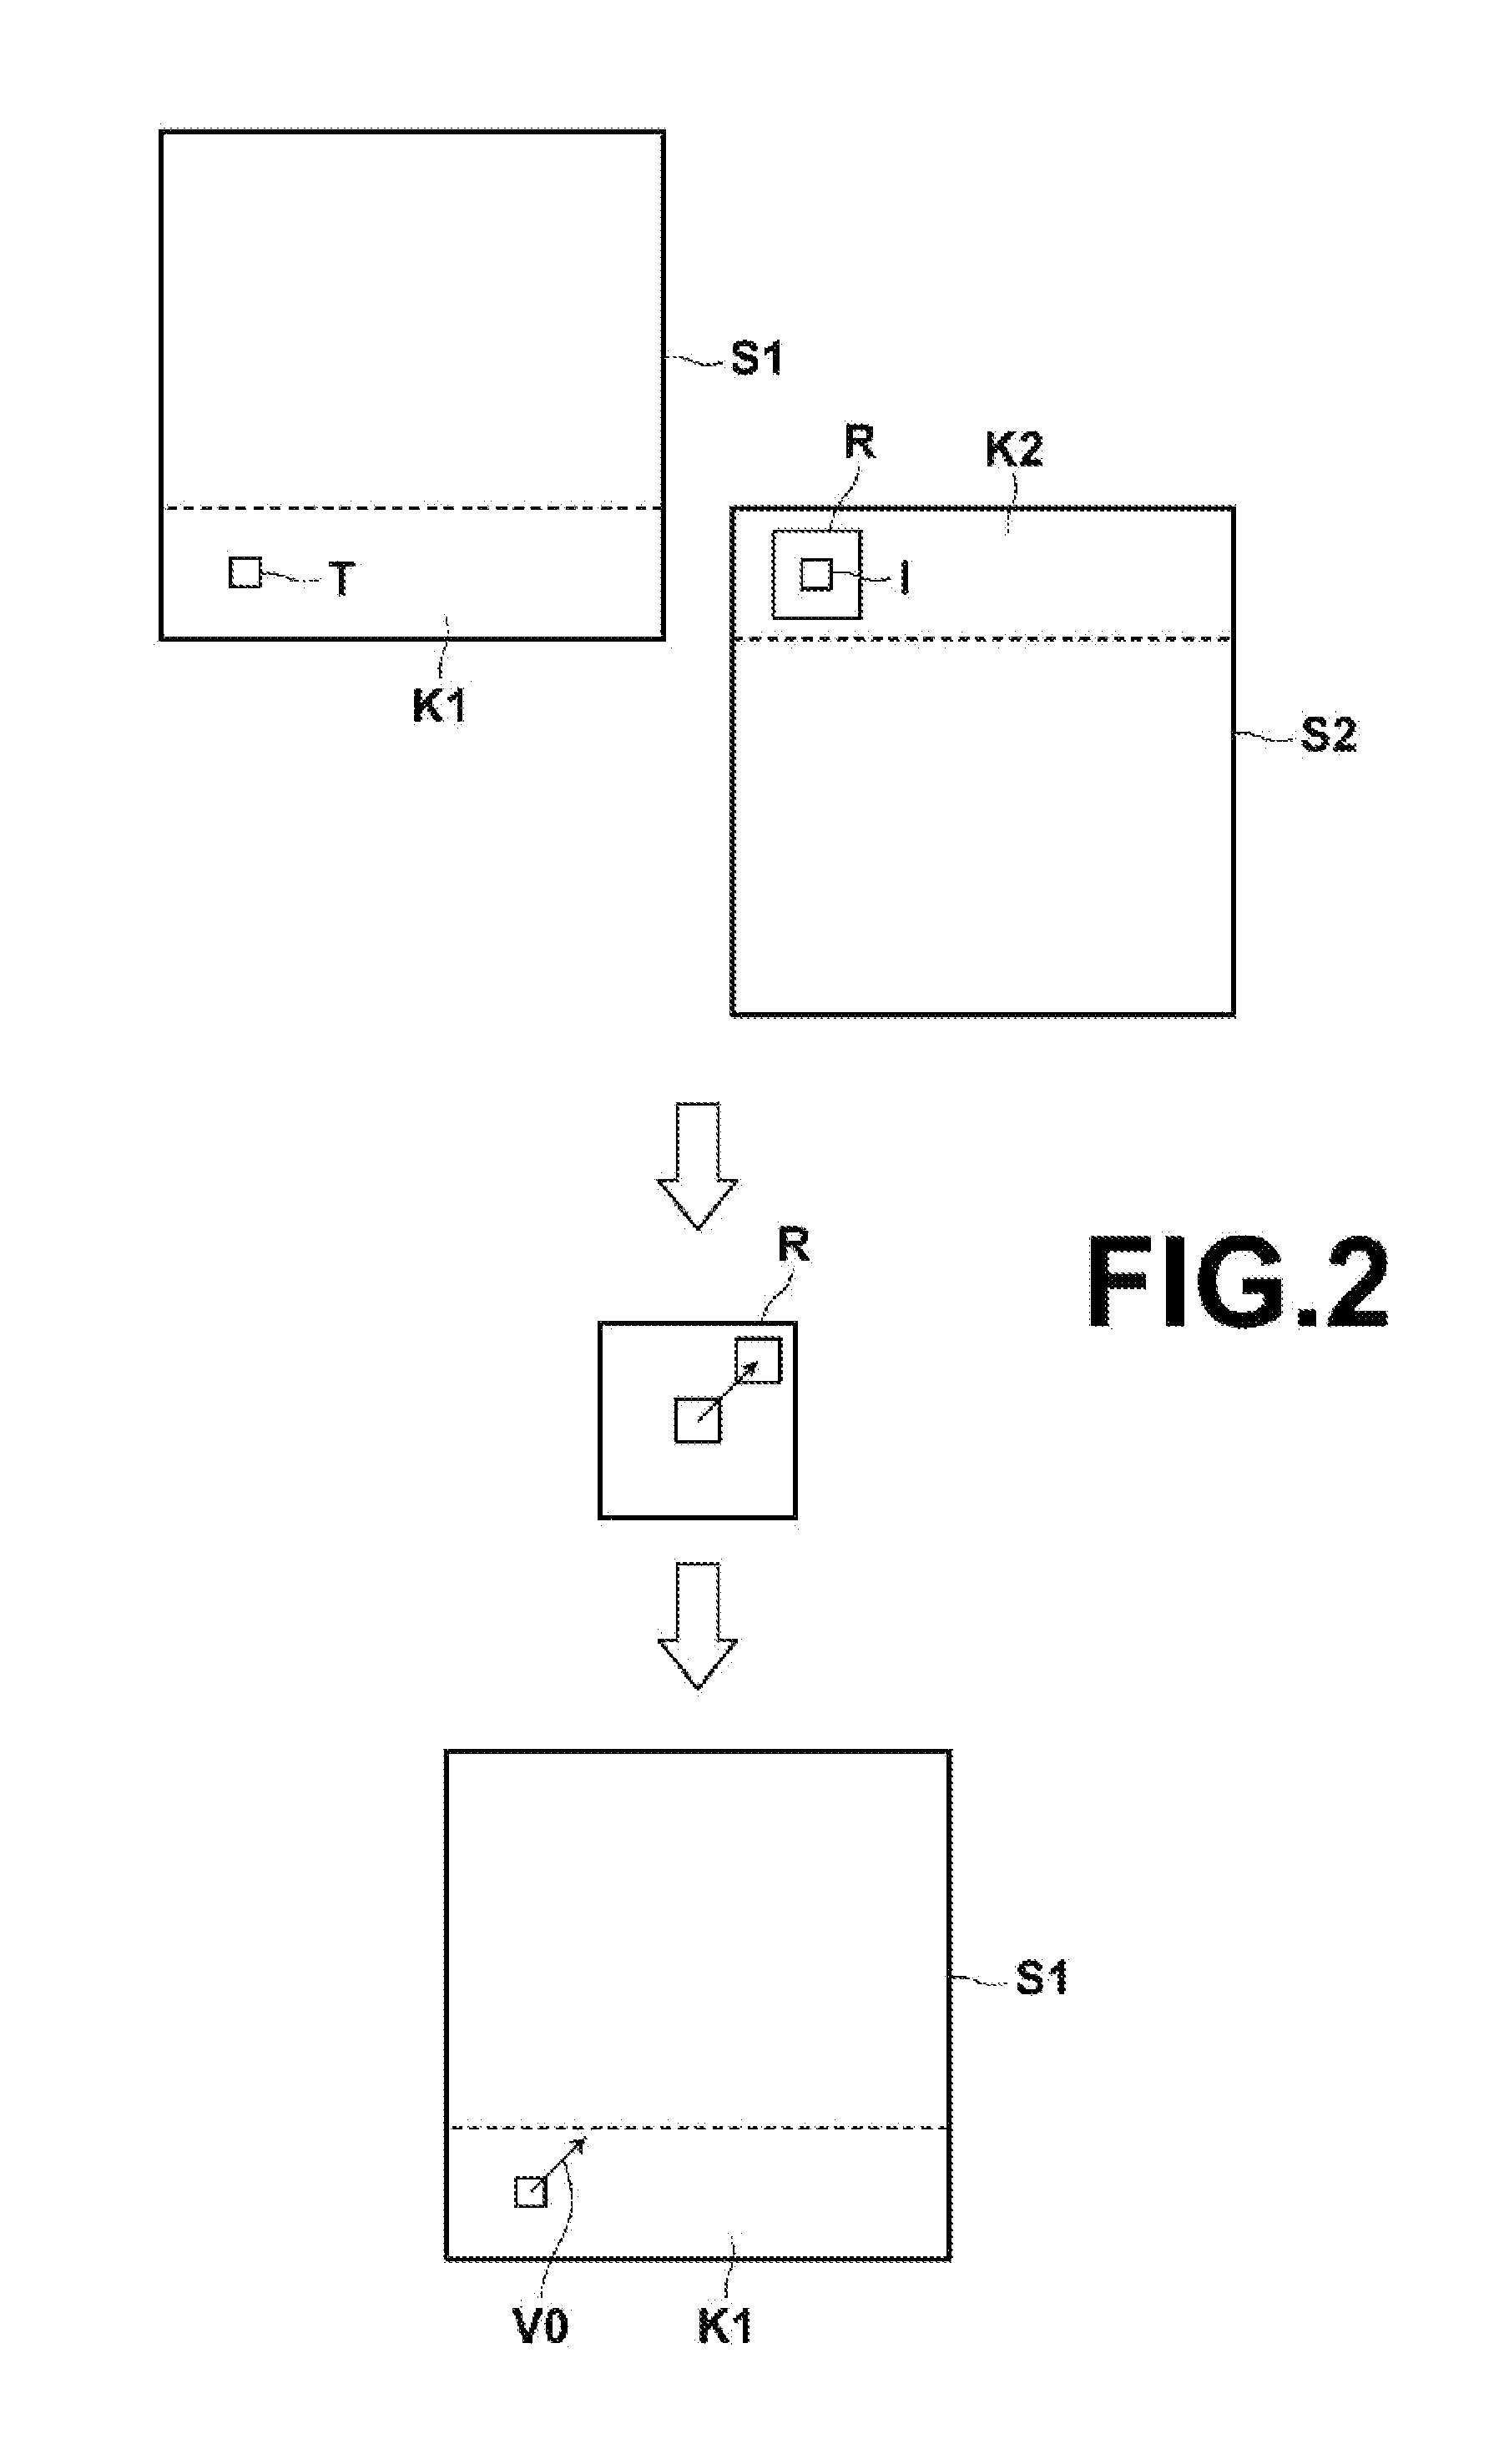 Body motion detection device and method, as well as radiographic imaging apparatus and method